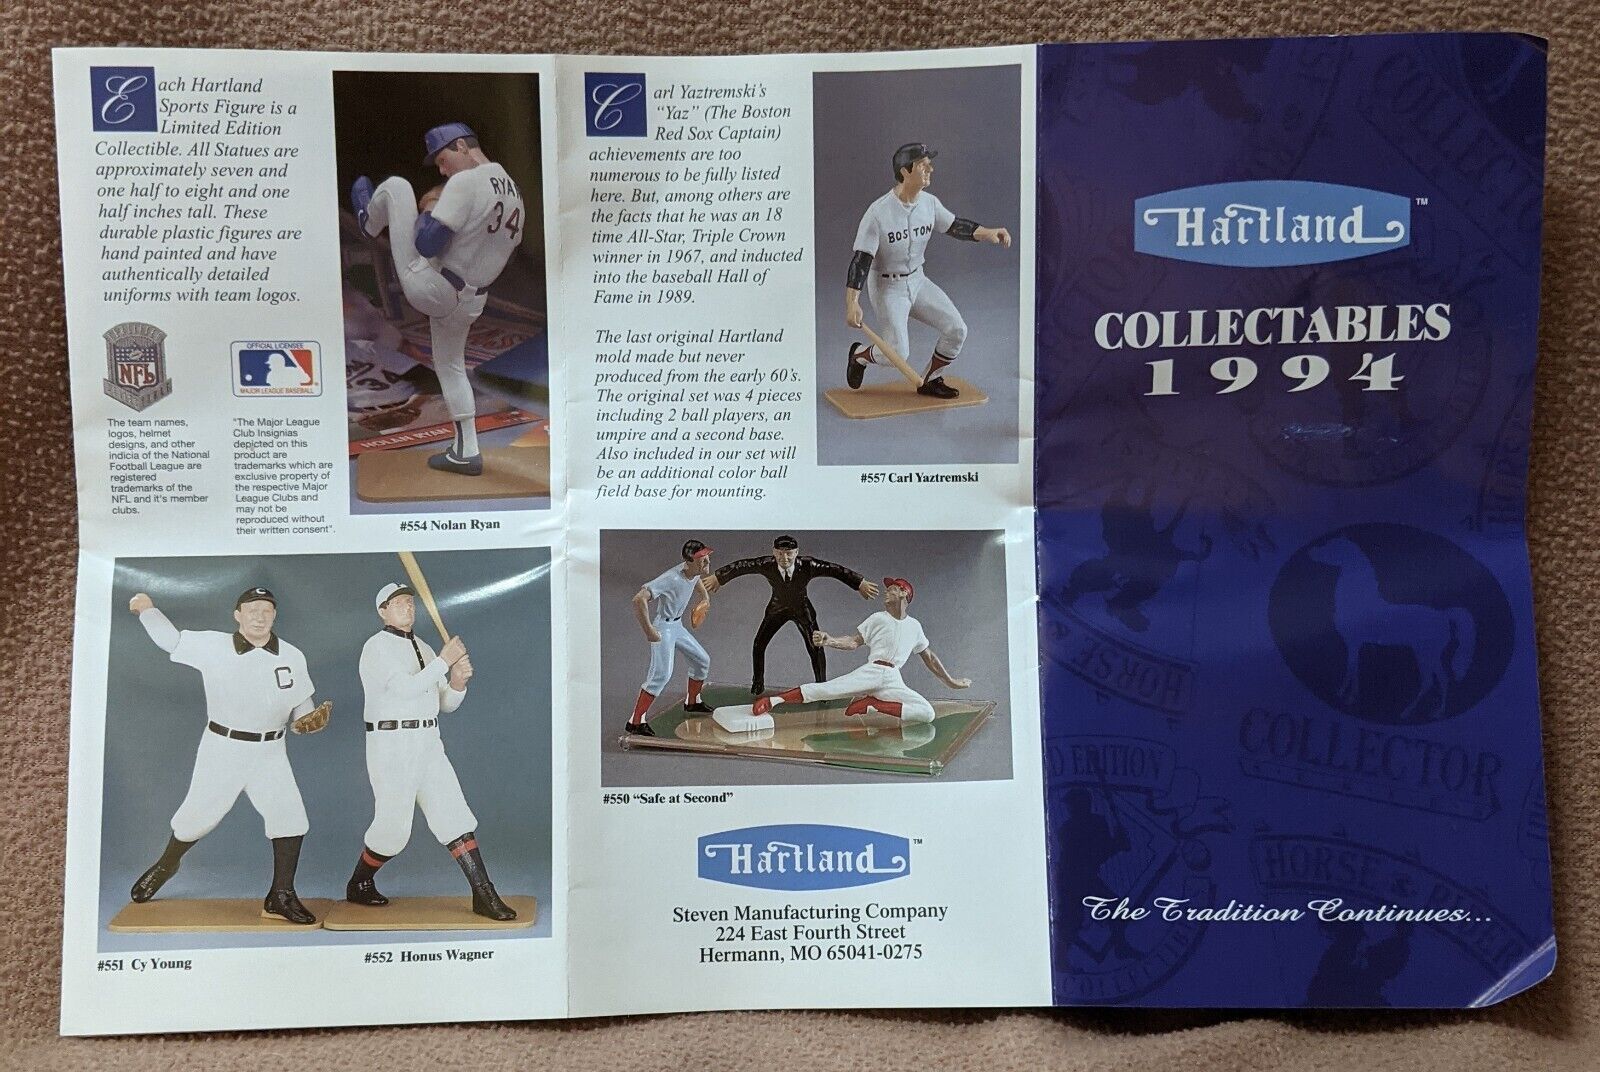 HARTLAND COLLECTABLES 1994The Tradition Continues STEVENS MANUFACTURING Brochure